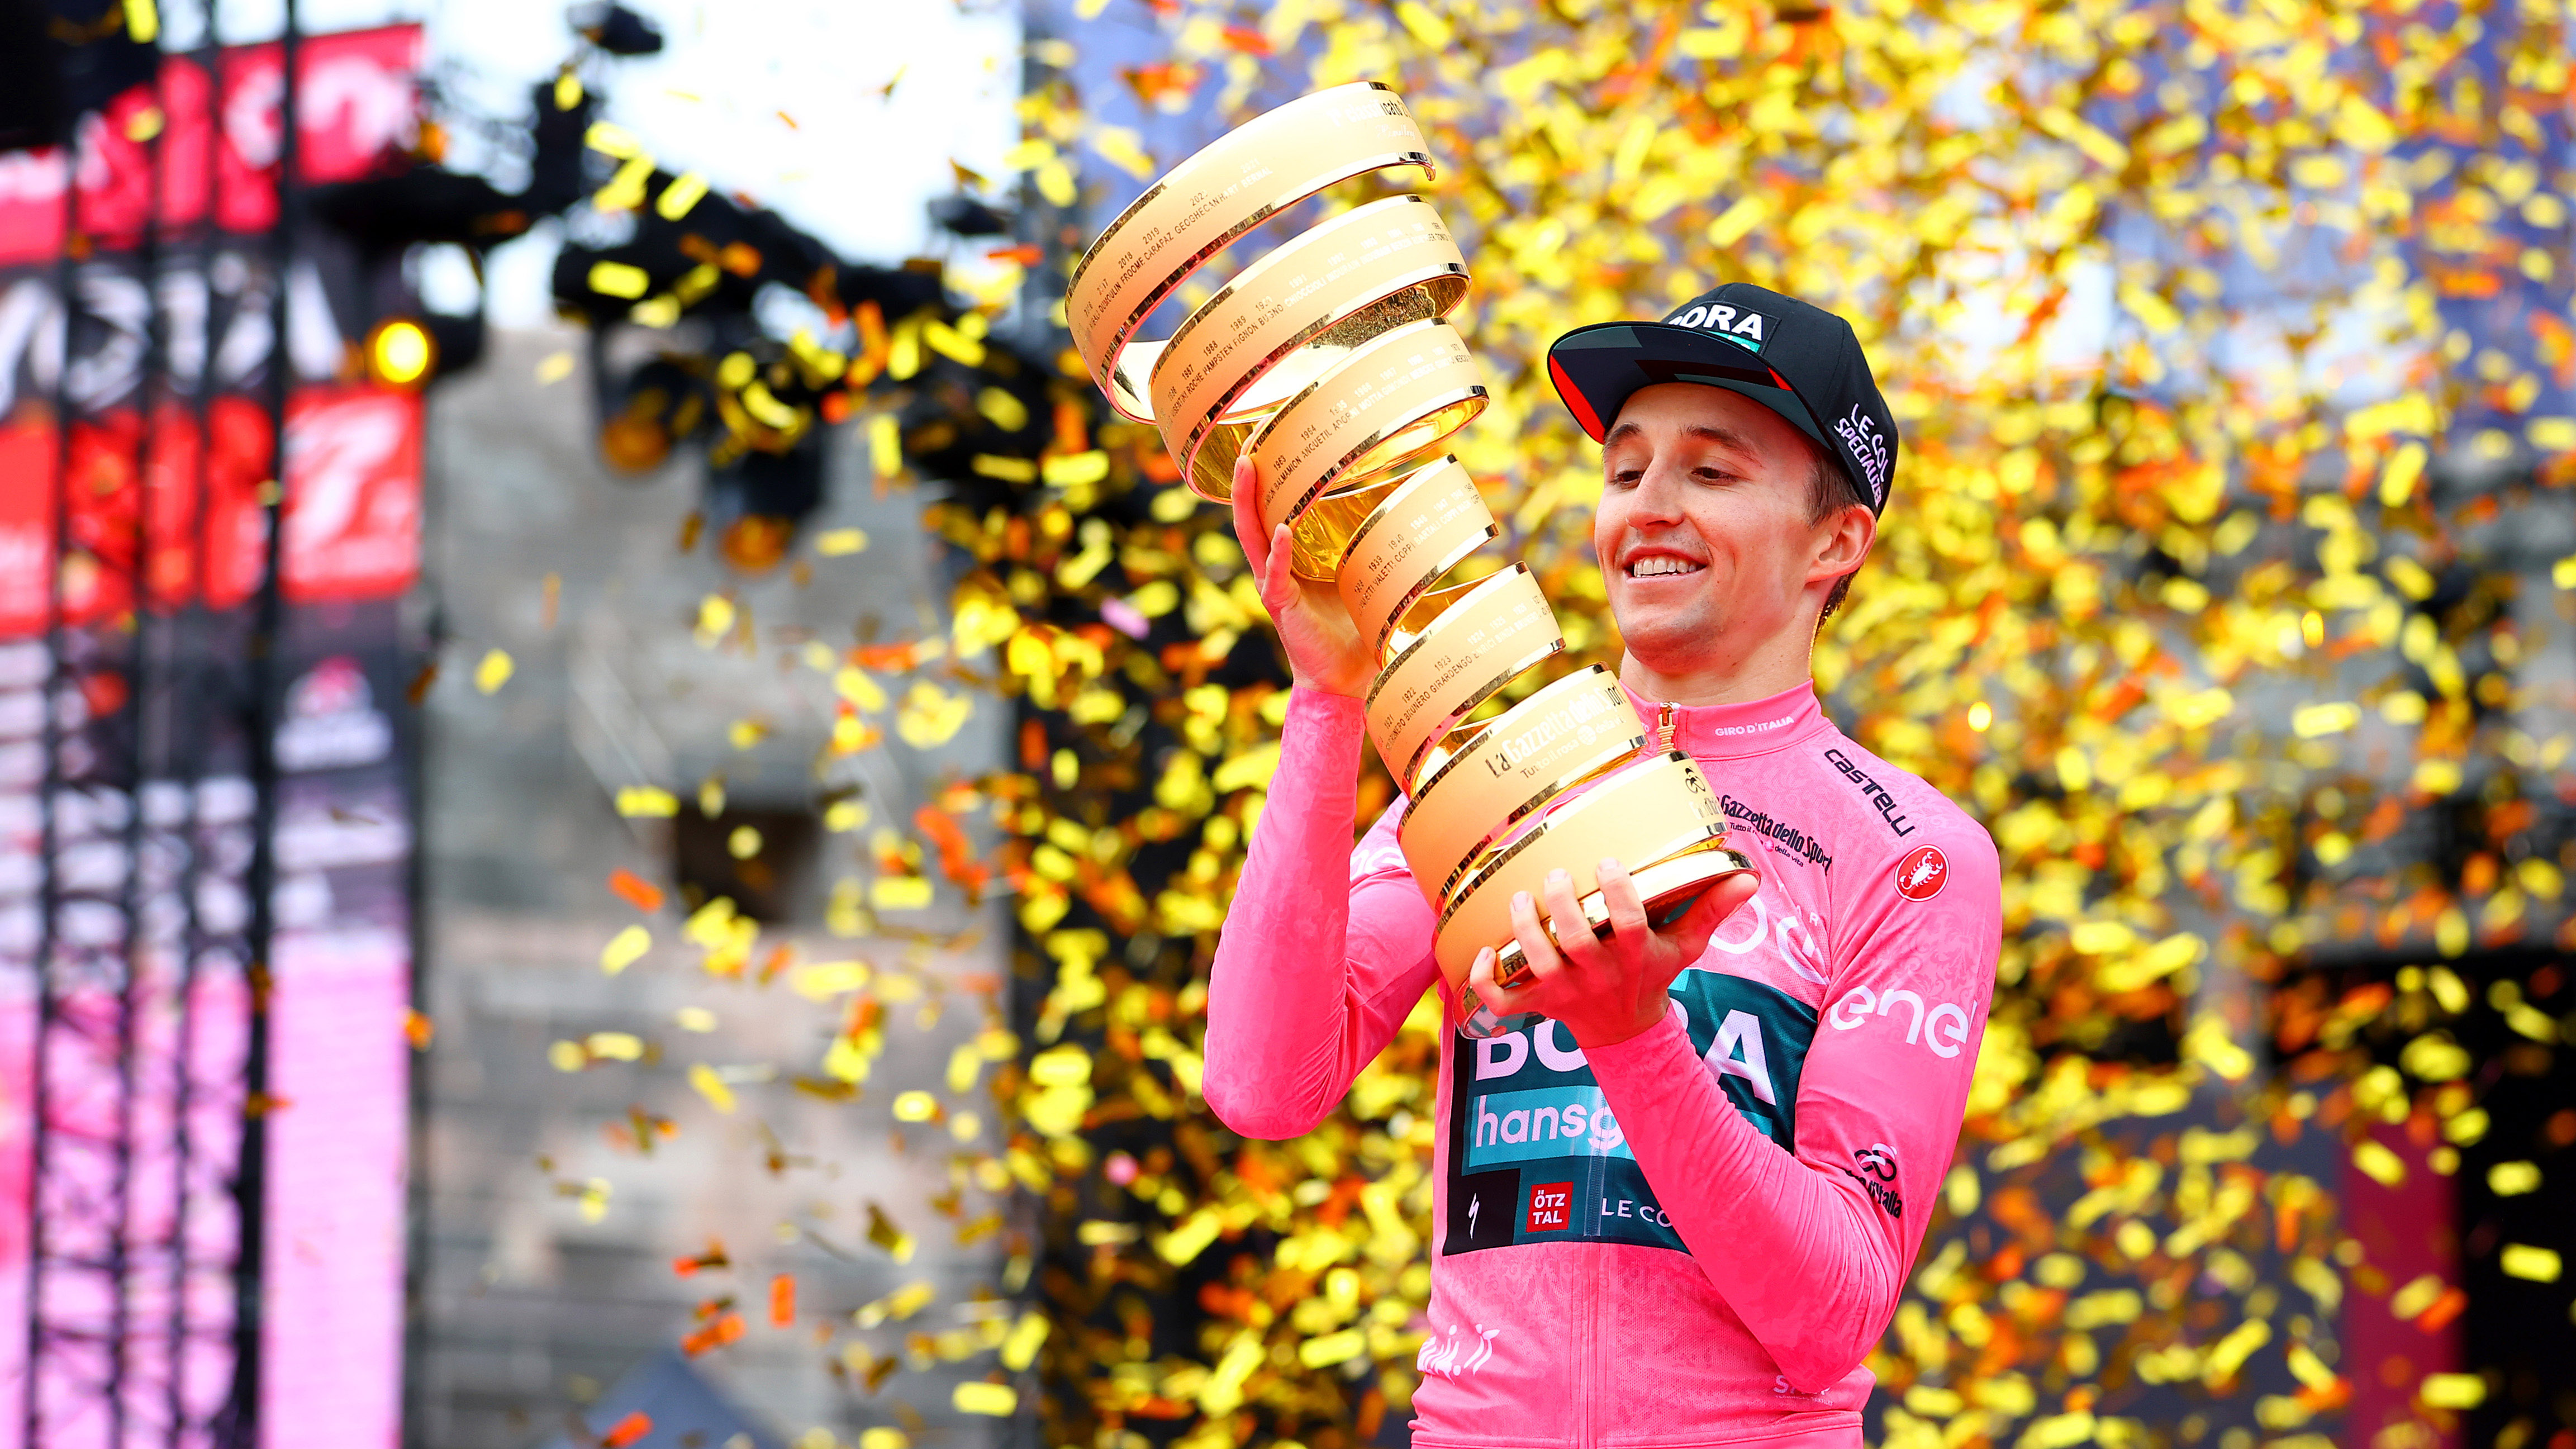 VERONA, ITALY - MAY 29: Jai Hindley of Australia and Team Bora - Hansgrohe Pink Leader Jersey celebrates at podium with the Trofeo Senza Fine as overall race winner during the 105th Giro d'Italia 2022, Stage 21 a 17,4km individual time trial stage from Verona to Verona / ITT / #Giro / #WorldTour / on May 29, 2022 in Verona, Italy. (Photo by Michael Steele/Getty Images)